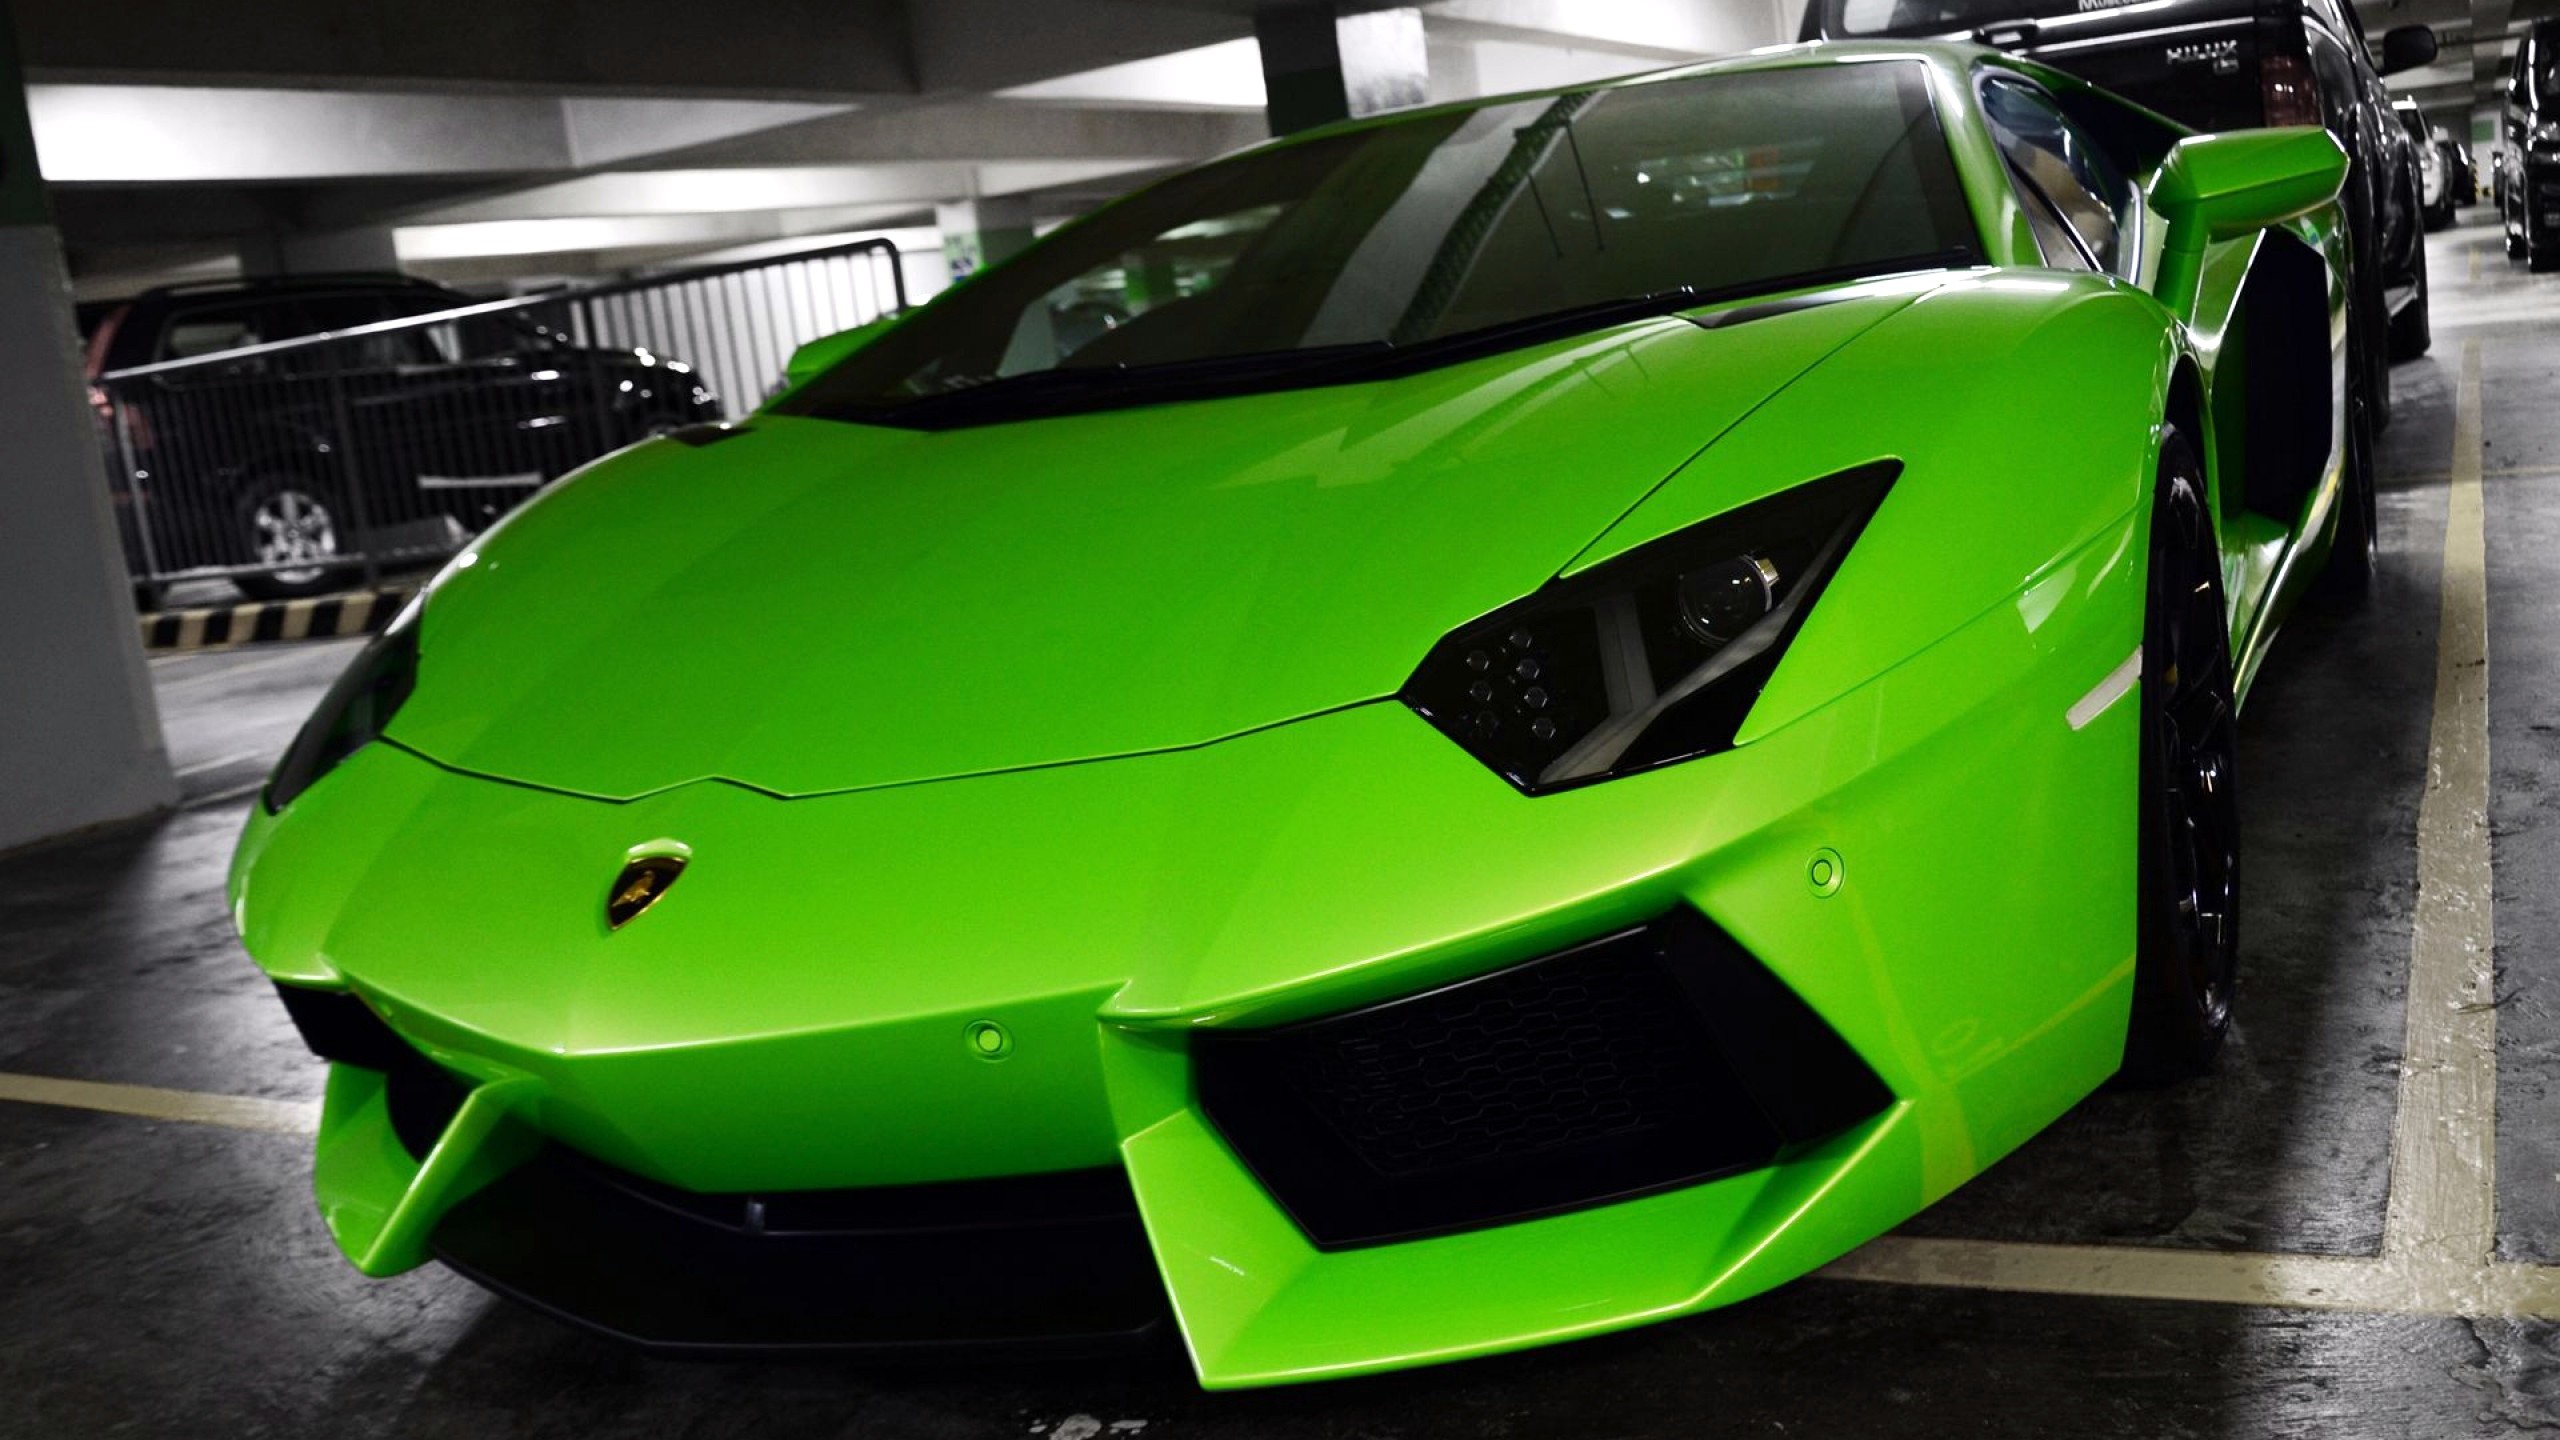 2560x1440 ... wallpapers lamborghini aventador green front side car pictures ...